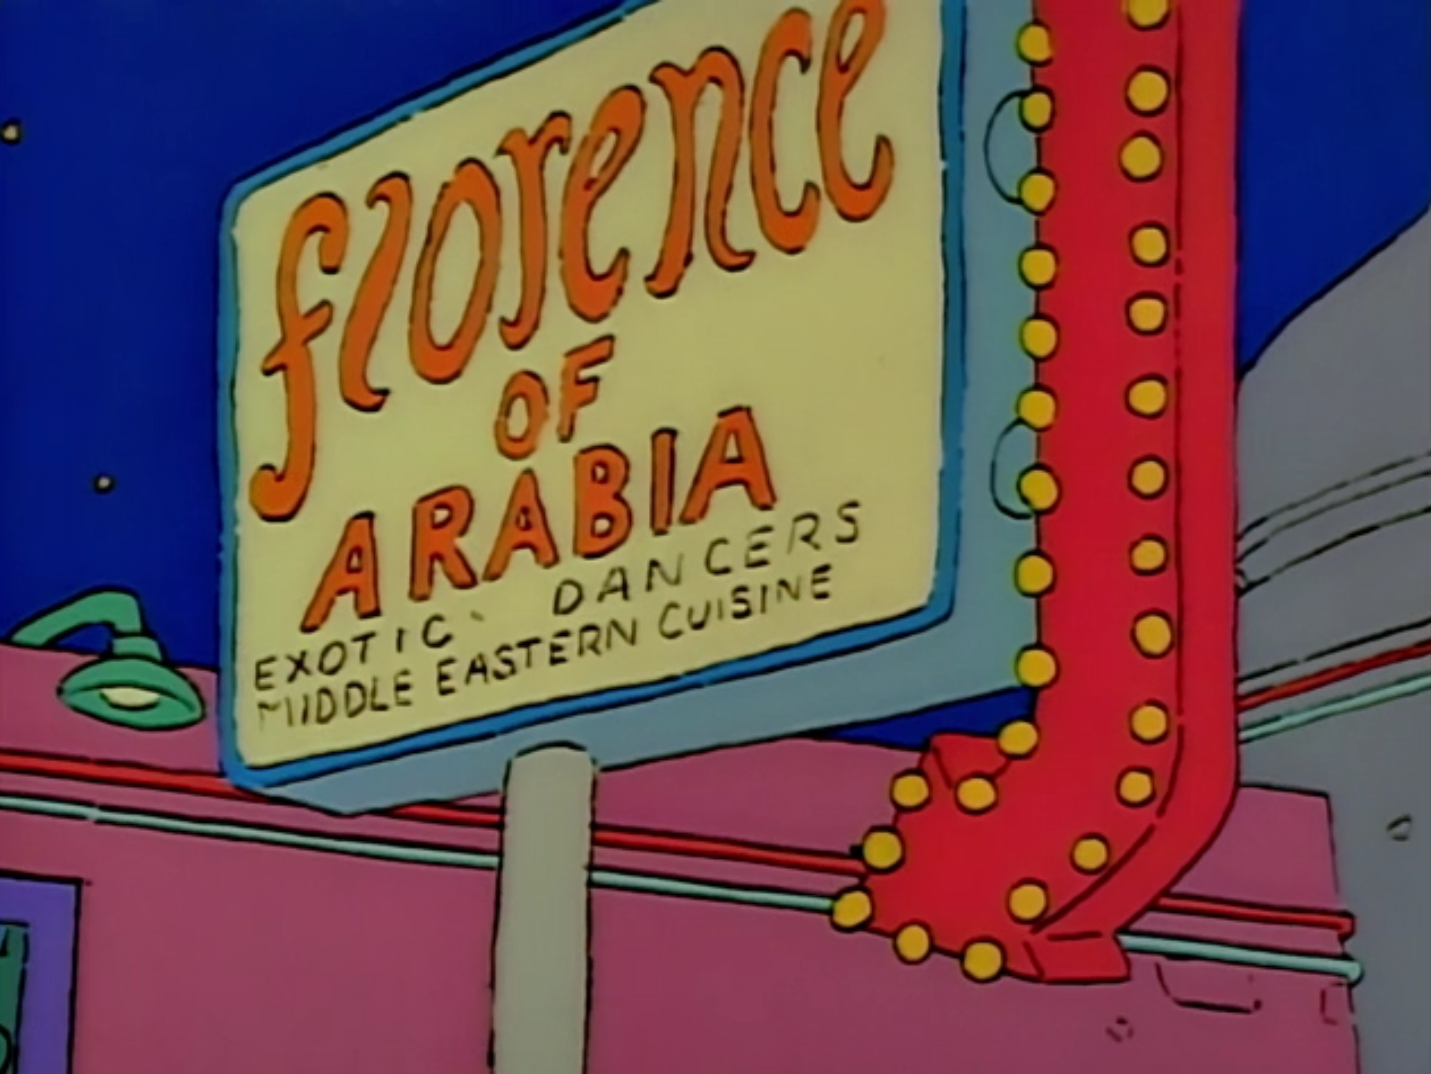 Florence_of_Arabia.png